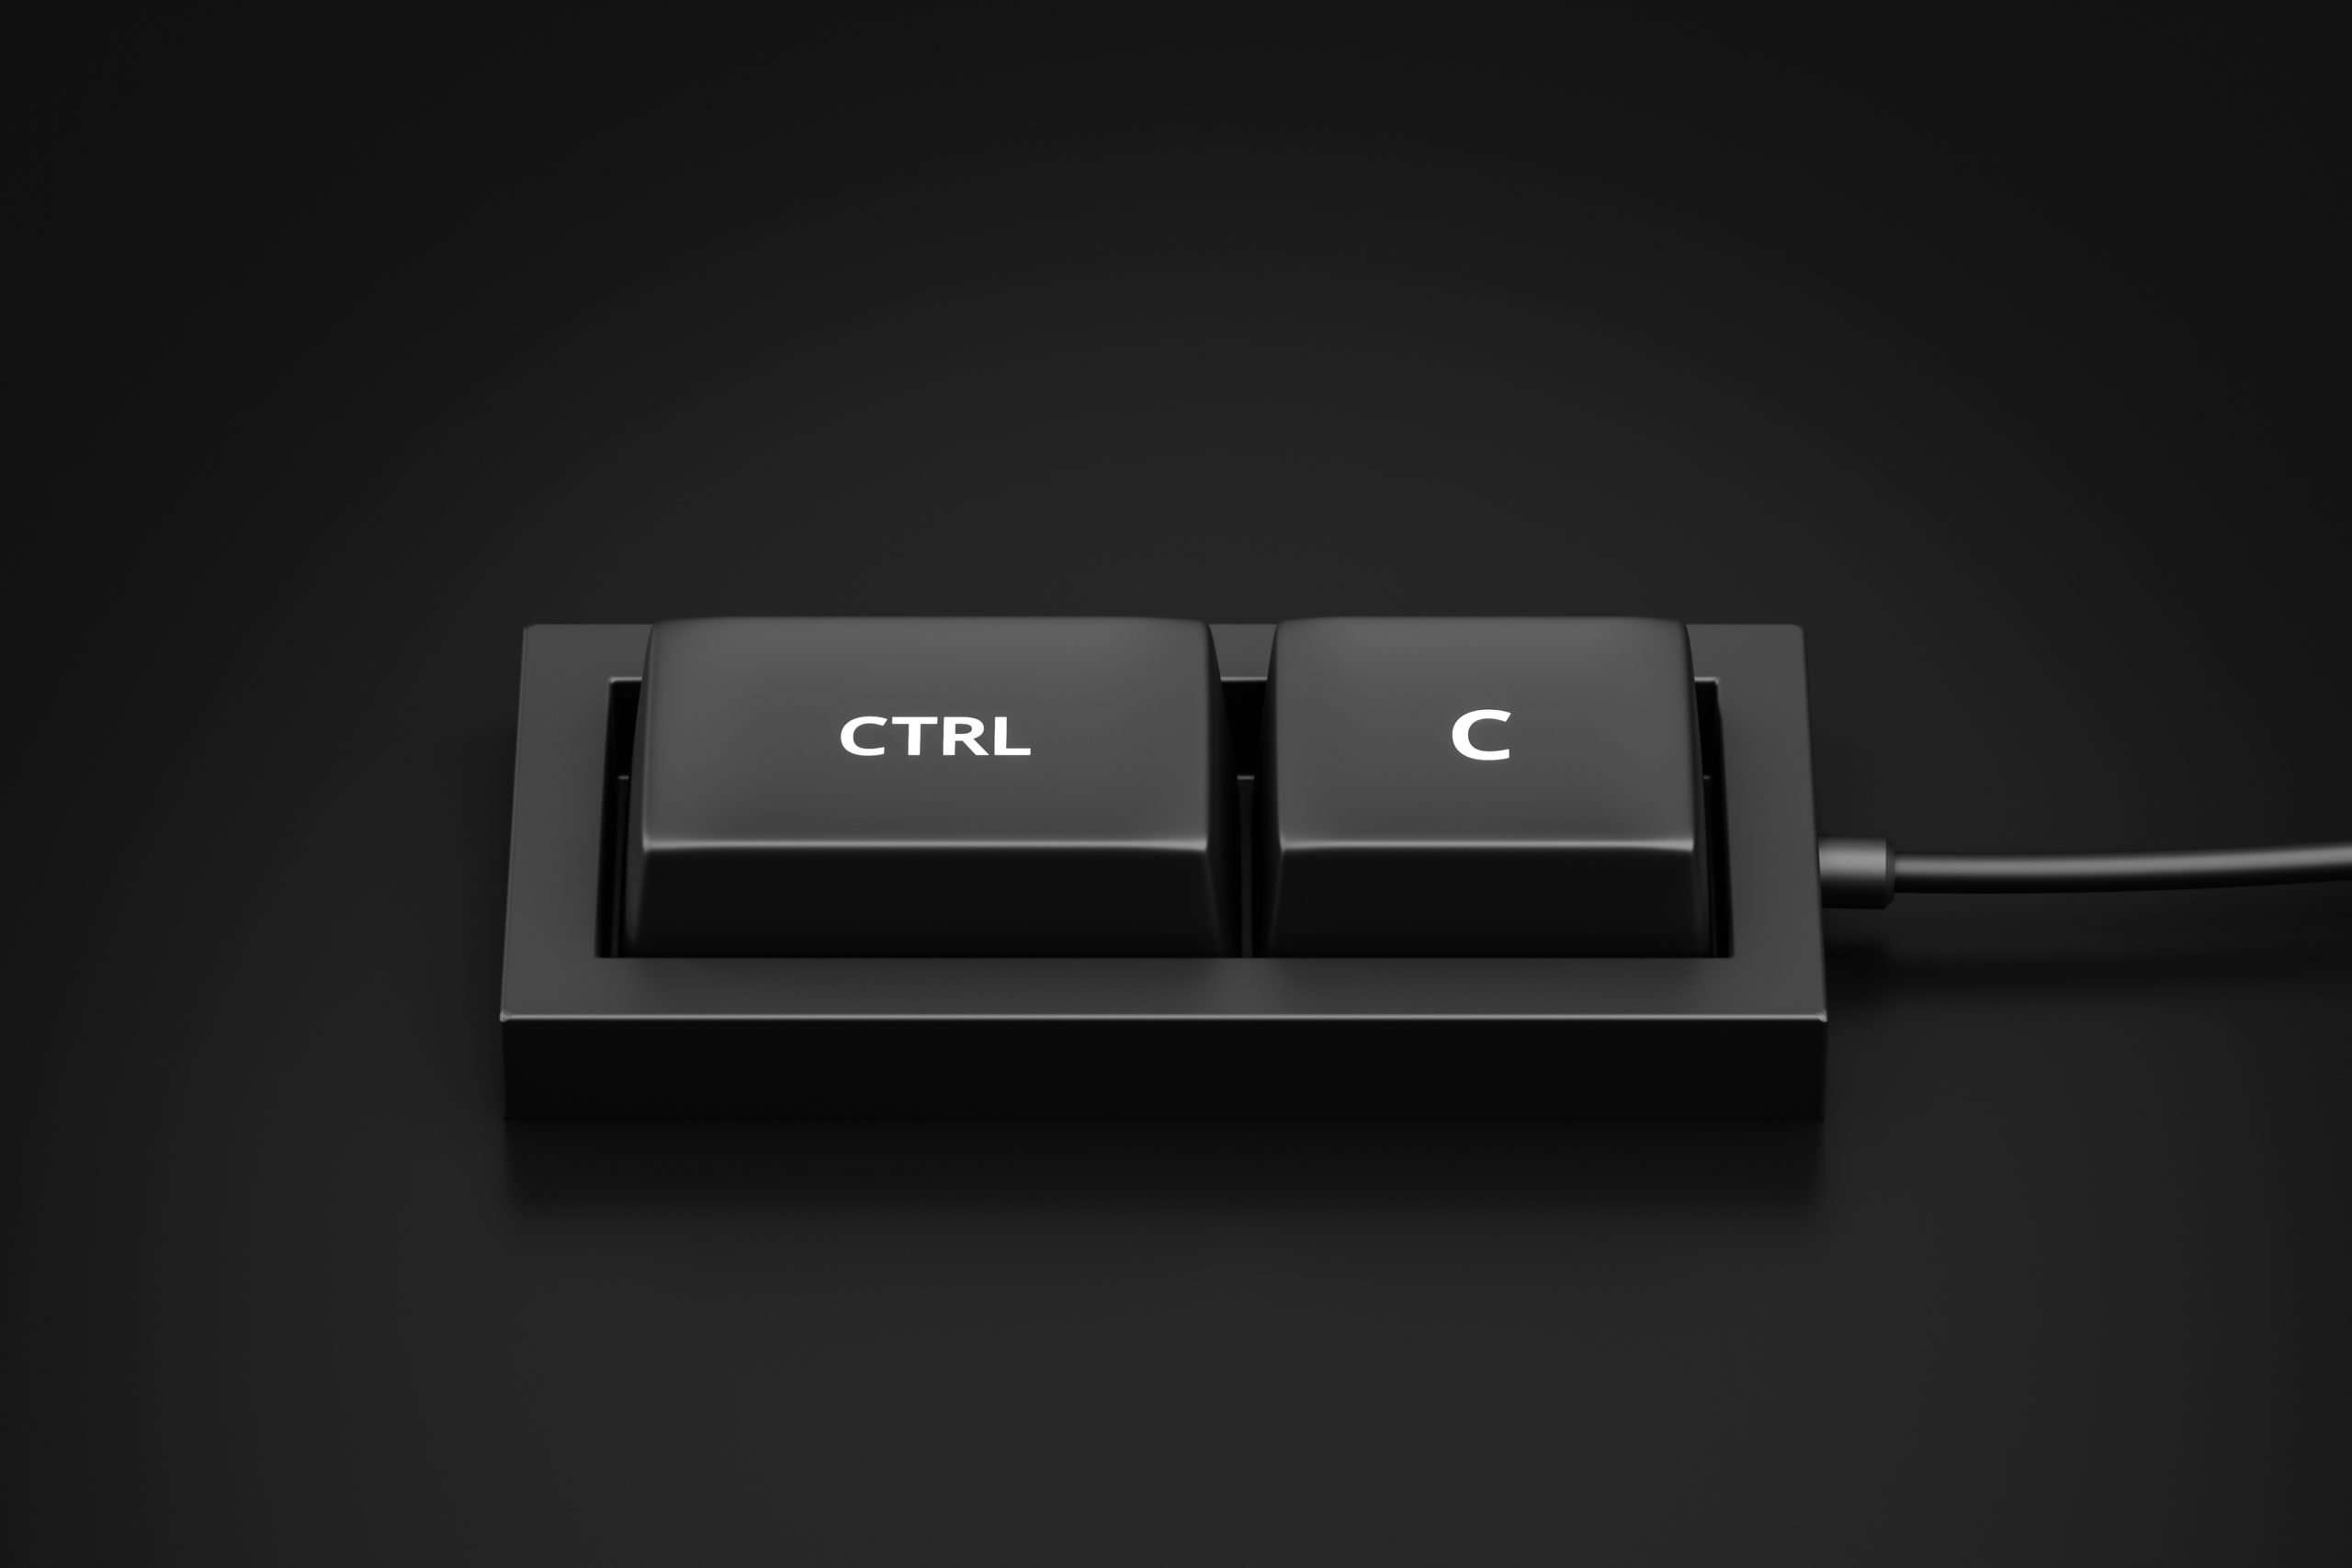 Photo of a keyboard Control C for Copy